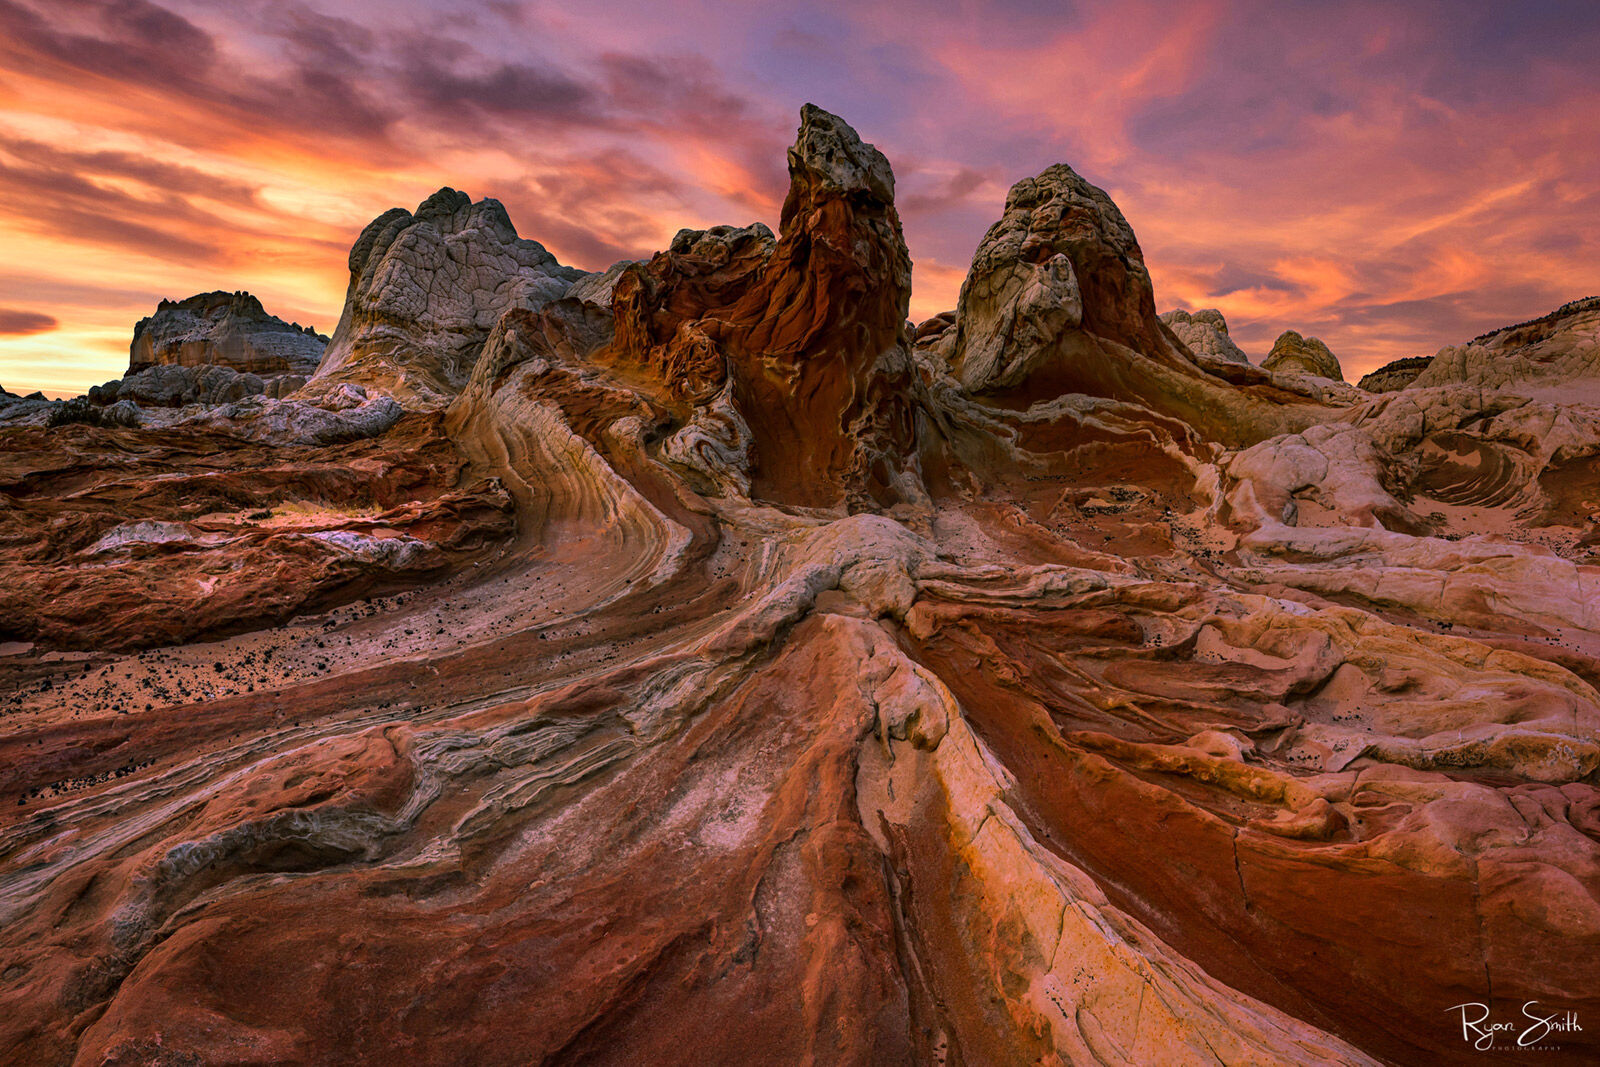 A landscape of tall rocks show signs of being worn away over the years with grooves worn by water. Shades of pink and deep reds in the rocks and pink in the sky